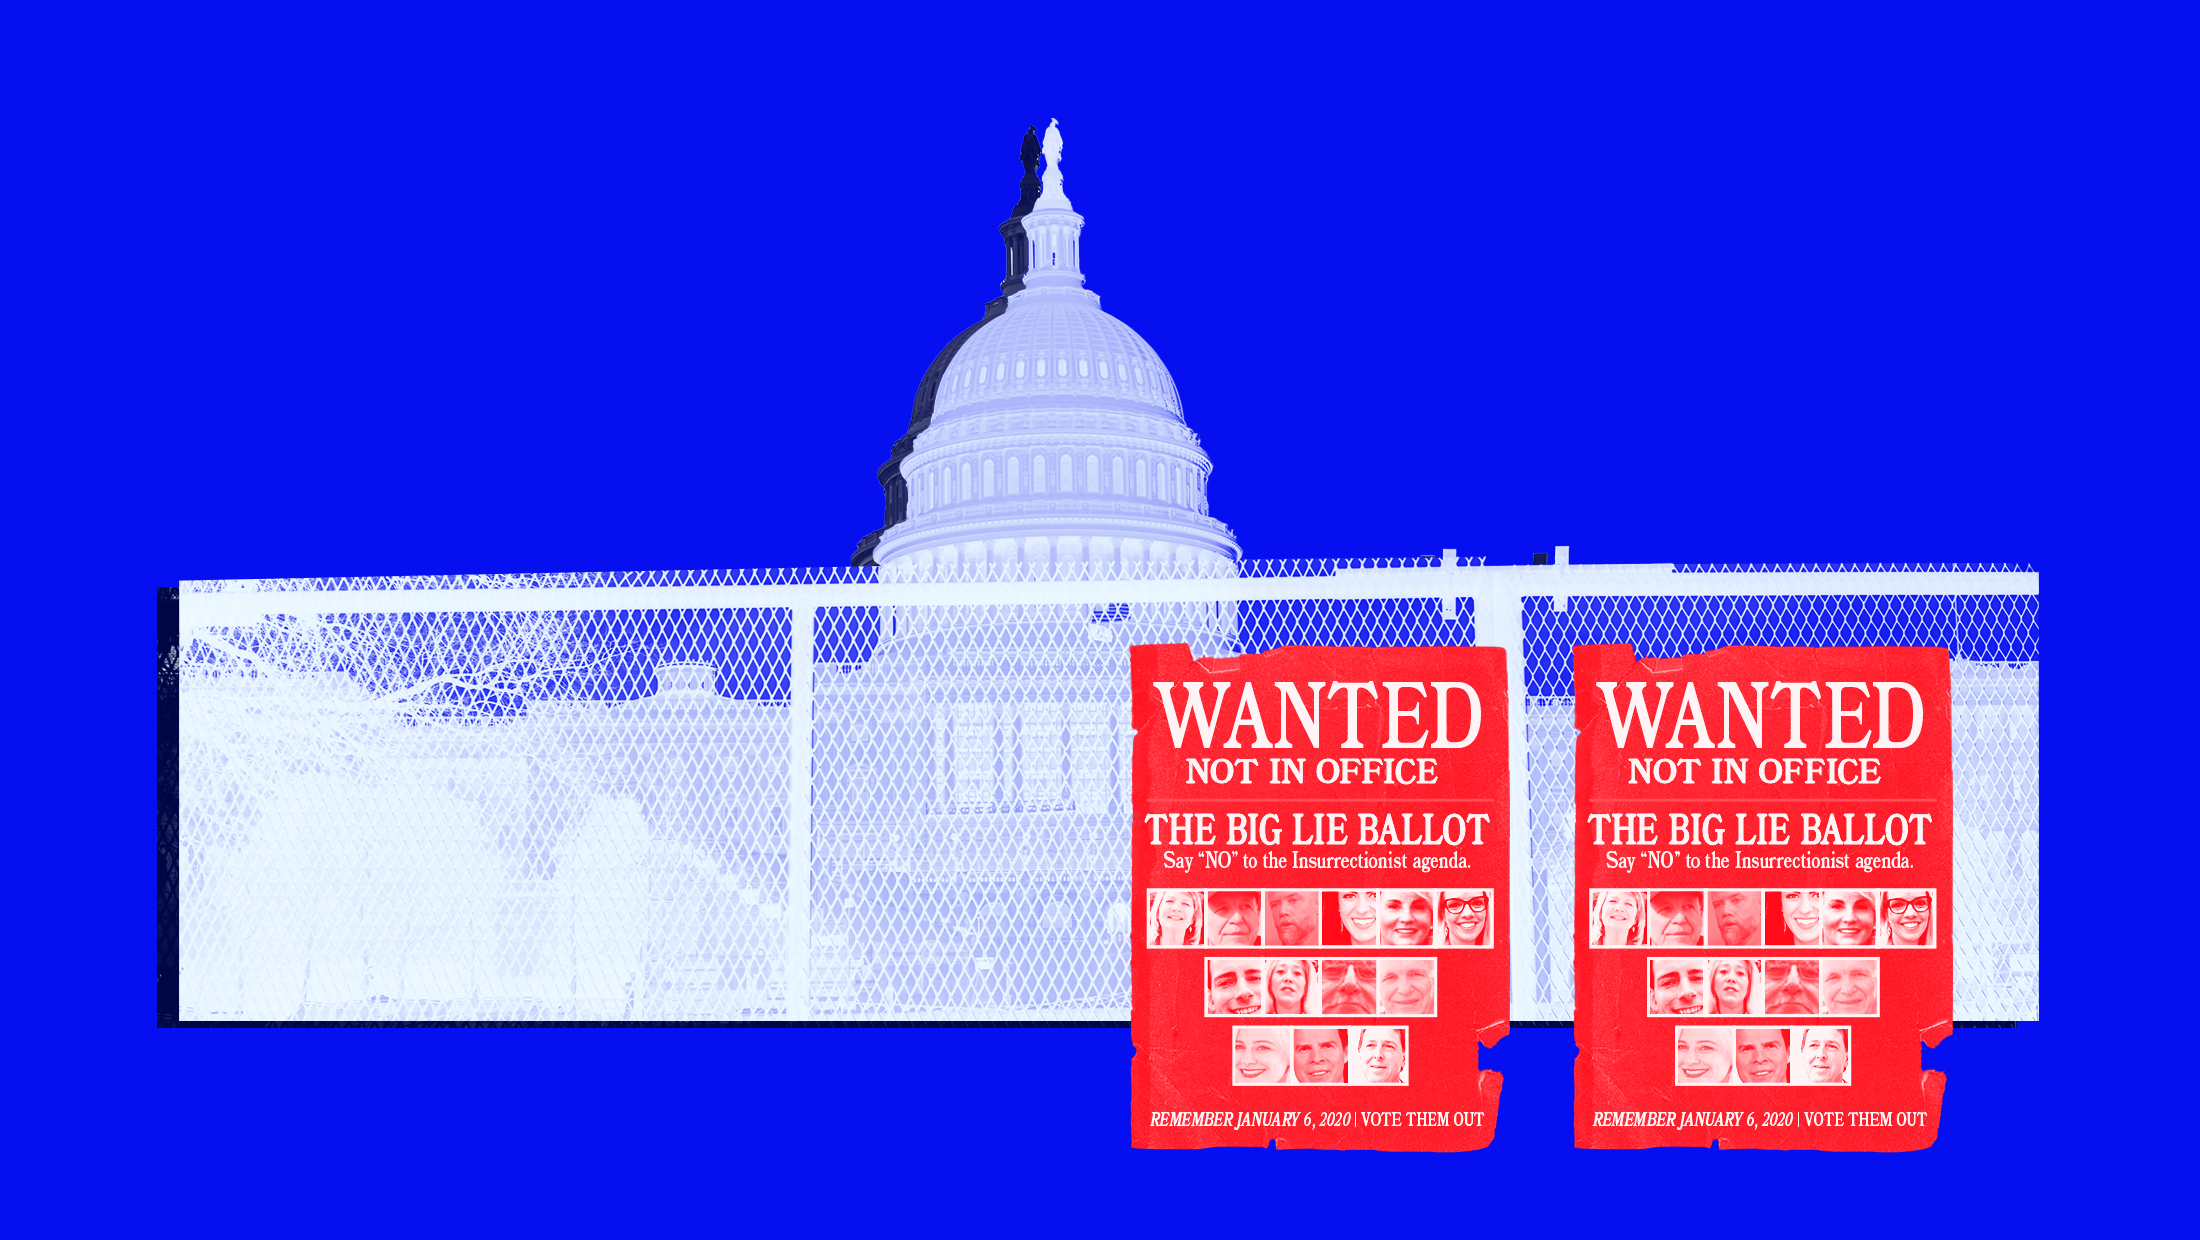 Two large posters placed on a metal fence outside the U.S. Capitol that features the faces of 13 individuals who participated in the January 6th insurrection and also ran for elected office with text that reads "WANTED NOT IN OFFICE THE BIG LIE BALLOT; SAY NO TO THE INSURRECTIONIST AGENDA; REMEMBER JANUARY 6, 2020 | VOTE THEM OUT"